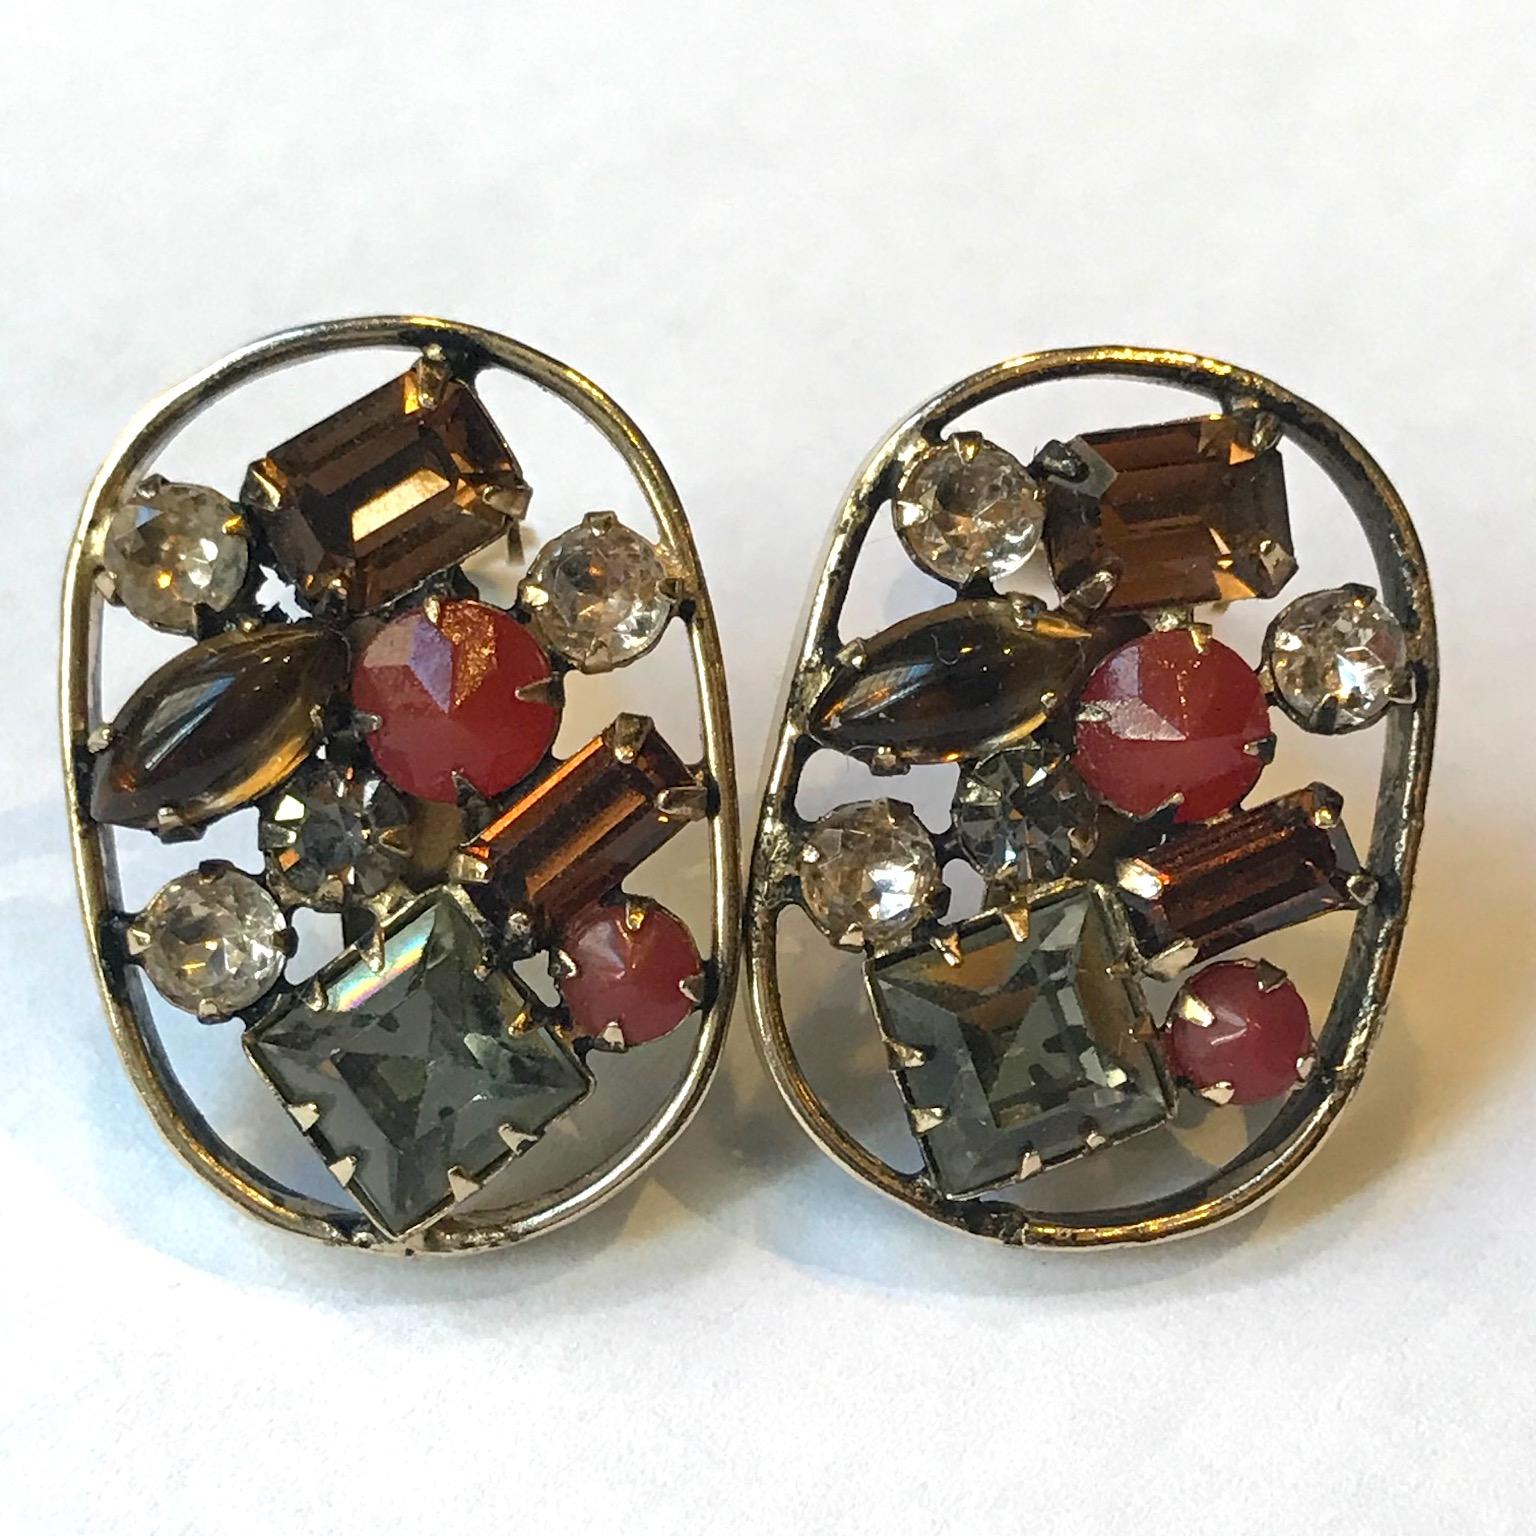 A wonderful pair of 1950s Henry Schreiner shadow box design clip earrings. The shadow box refers to the wide flat metal boarder around the earrings. It was design devised by Ambrose Albert, the son-in-law of Henry Schreiner. It was used on brooches,